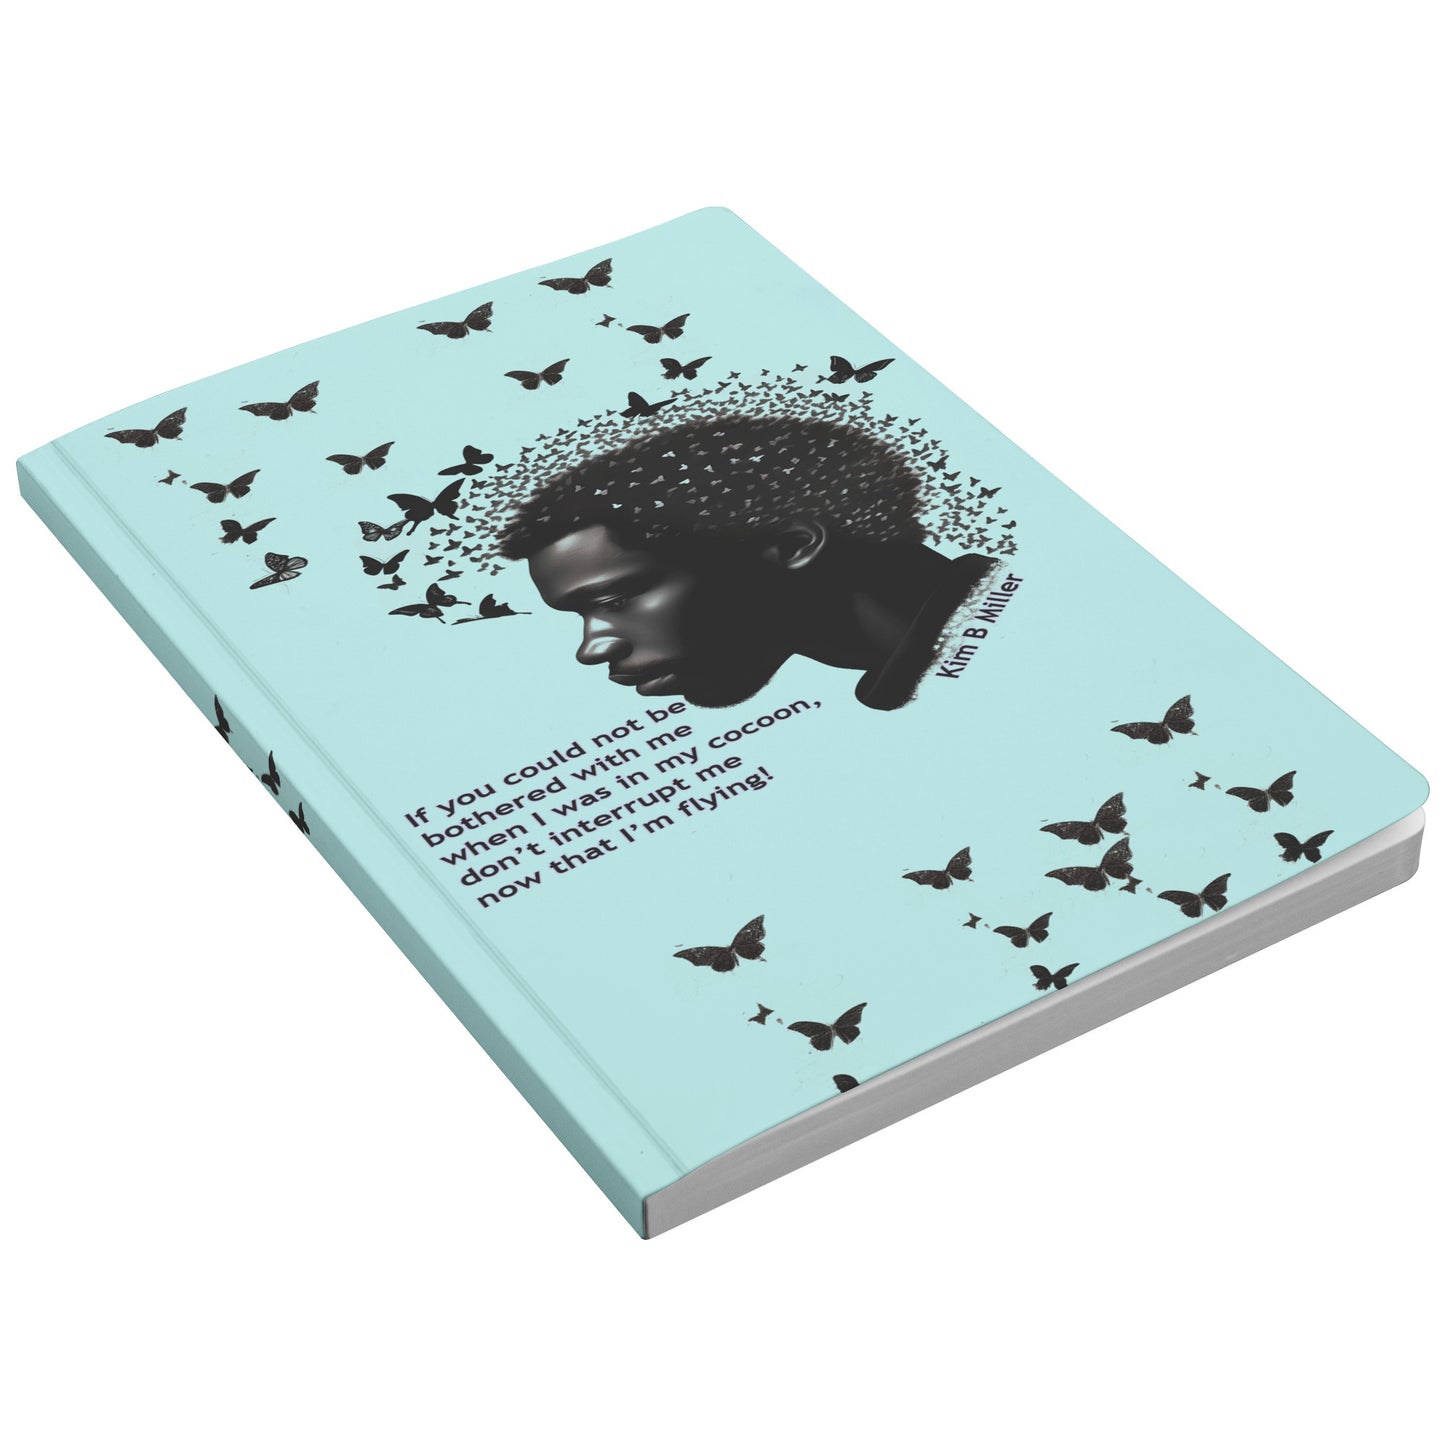 Cocoon-Flying: Paperback Journal